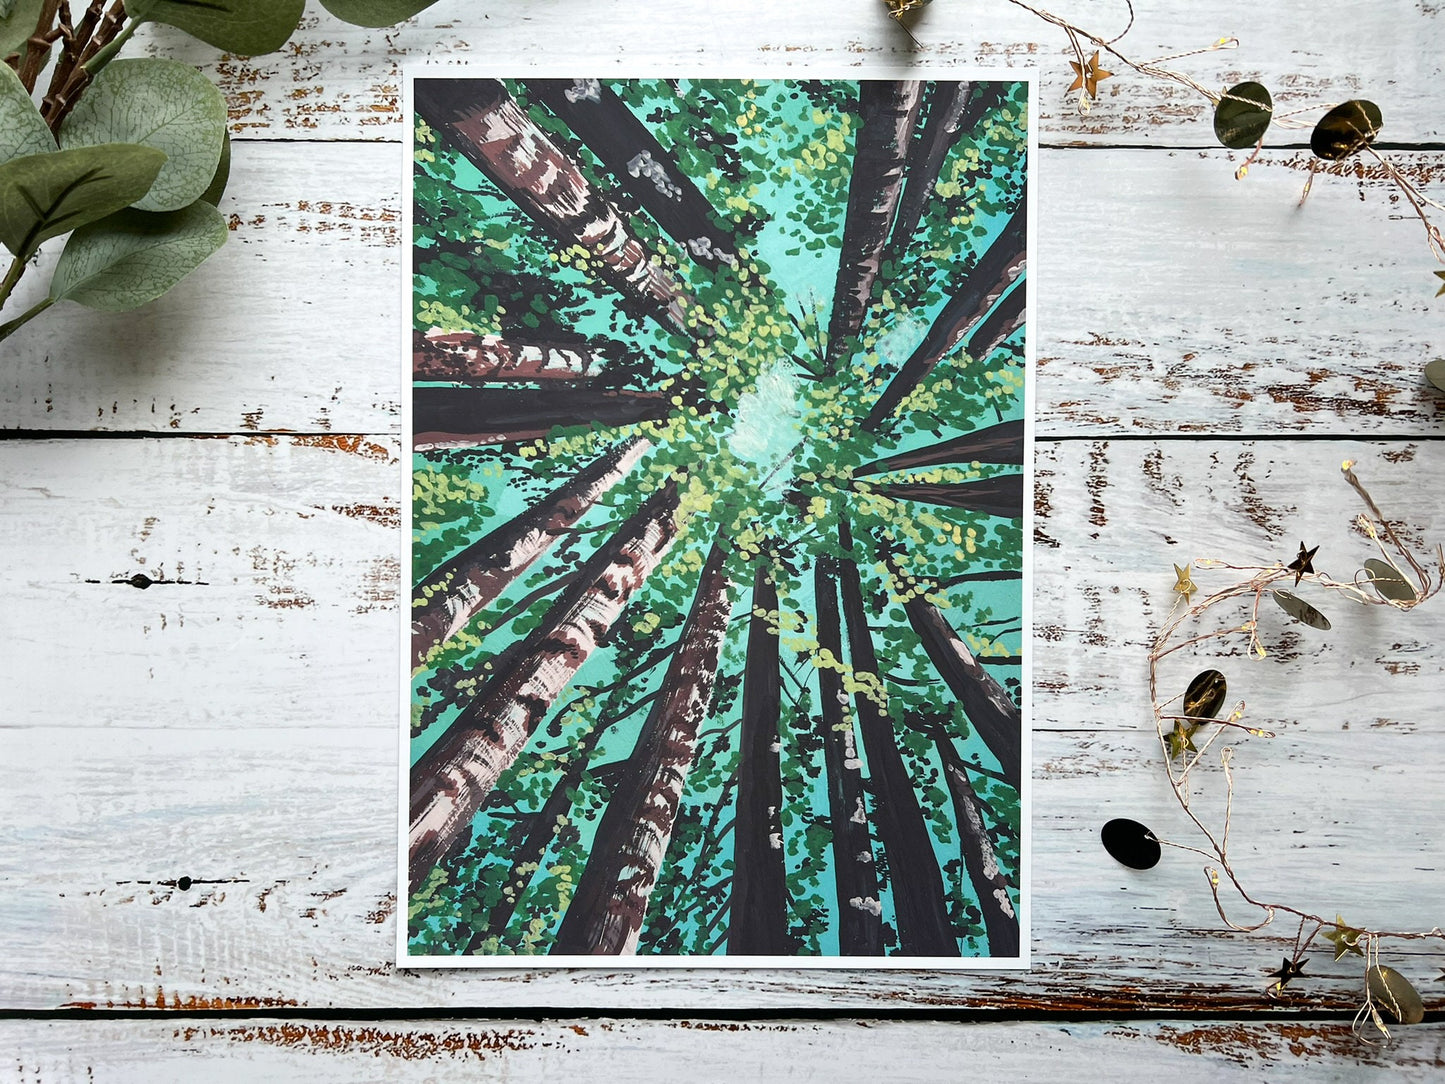 A gouache print of Californian redwood trees from the perspective of standing on the ground and looking up at the sky